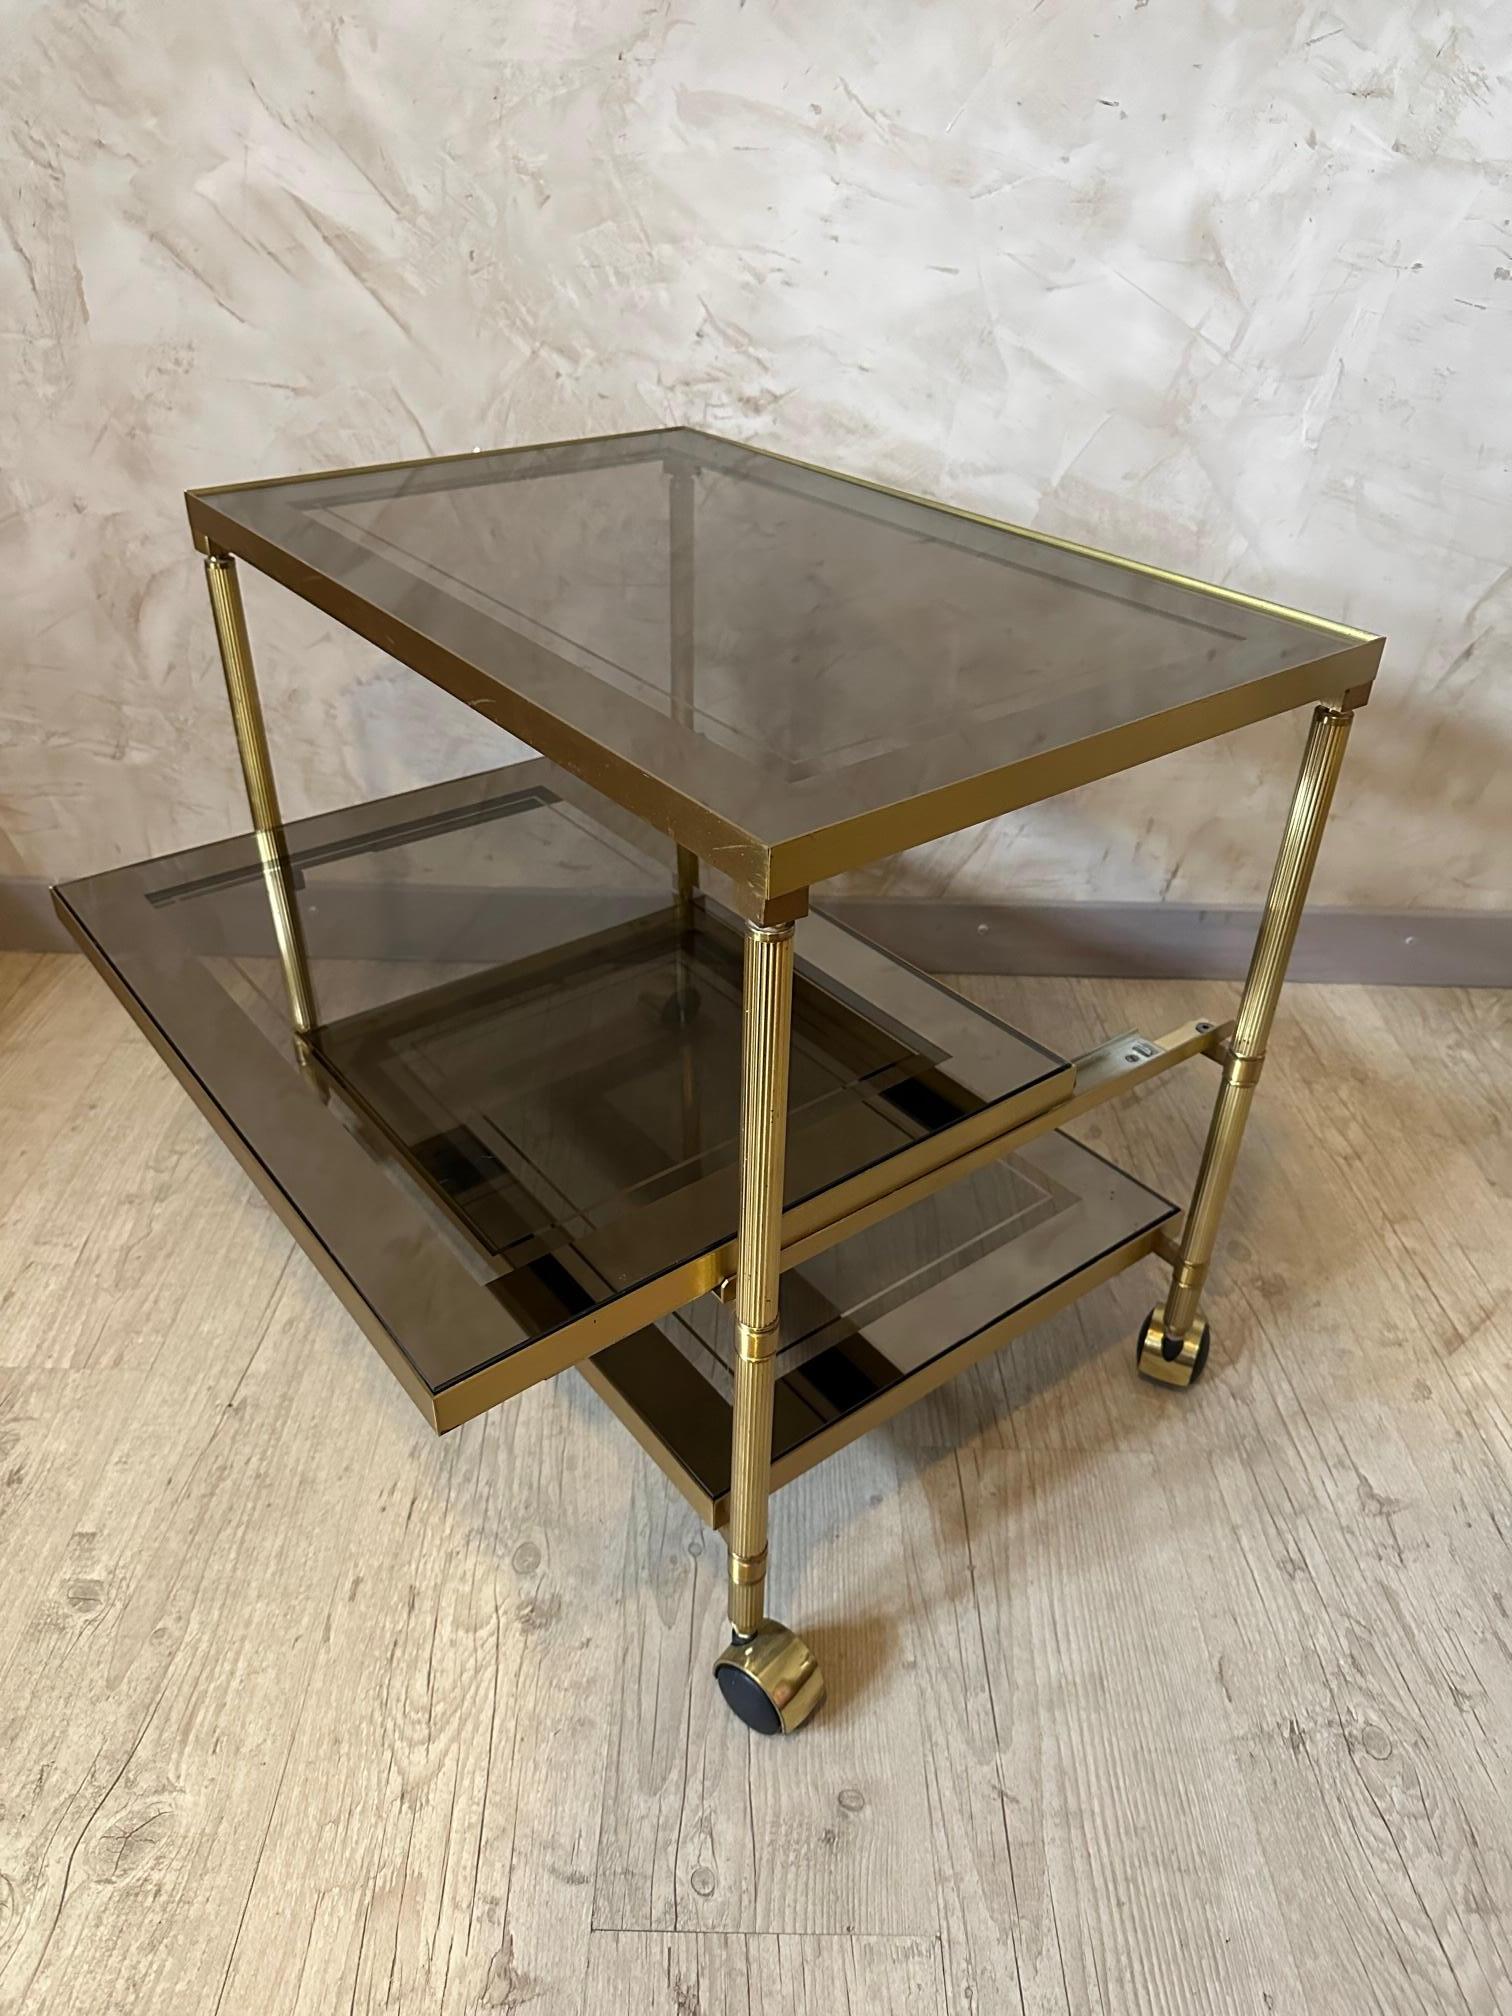 20th century French Brass and Glass Rolling Dessert Table, 1970s For Sale 1